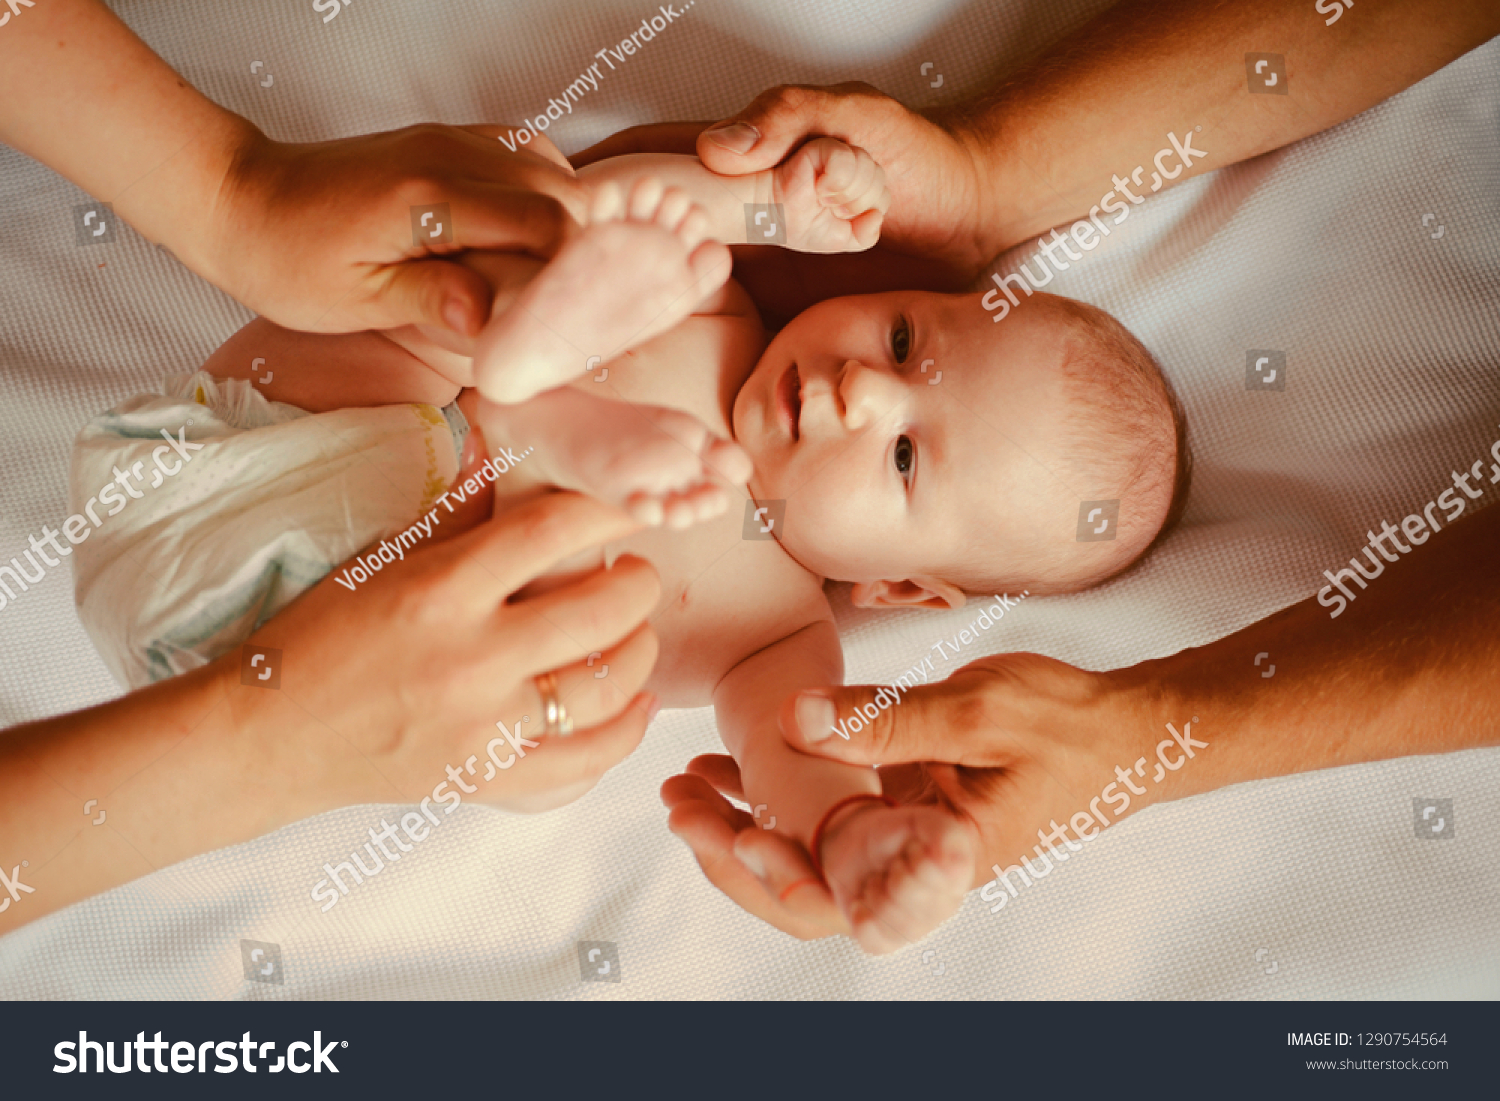 Single child pregnancy. Healthy pregnancy and newborn care. Love baby. Newborn baby and mother. Pregnancy and motherhood. Motherhood suits her. #1290754564